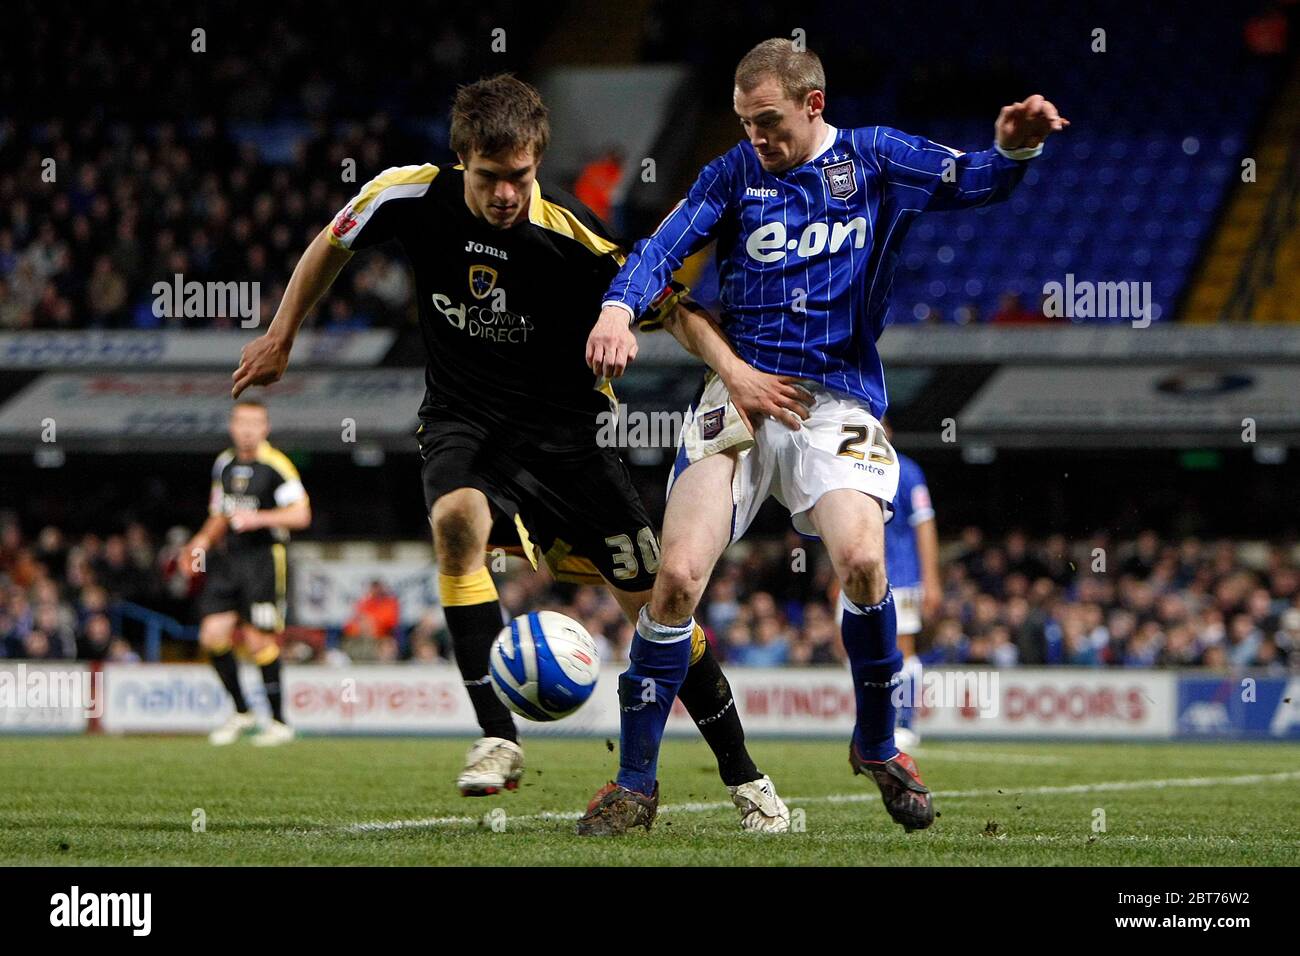 IPSWICH, UK. APRIL 09: Cardiff's Aaron Ramsey gets to grips with Ipswich's Alan Quinn  during the Coca Cola Championship between Ipswich Town and Card Stock Photo